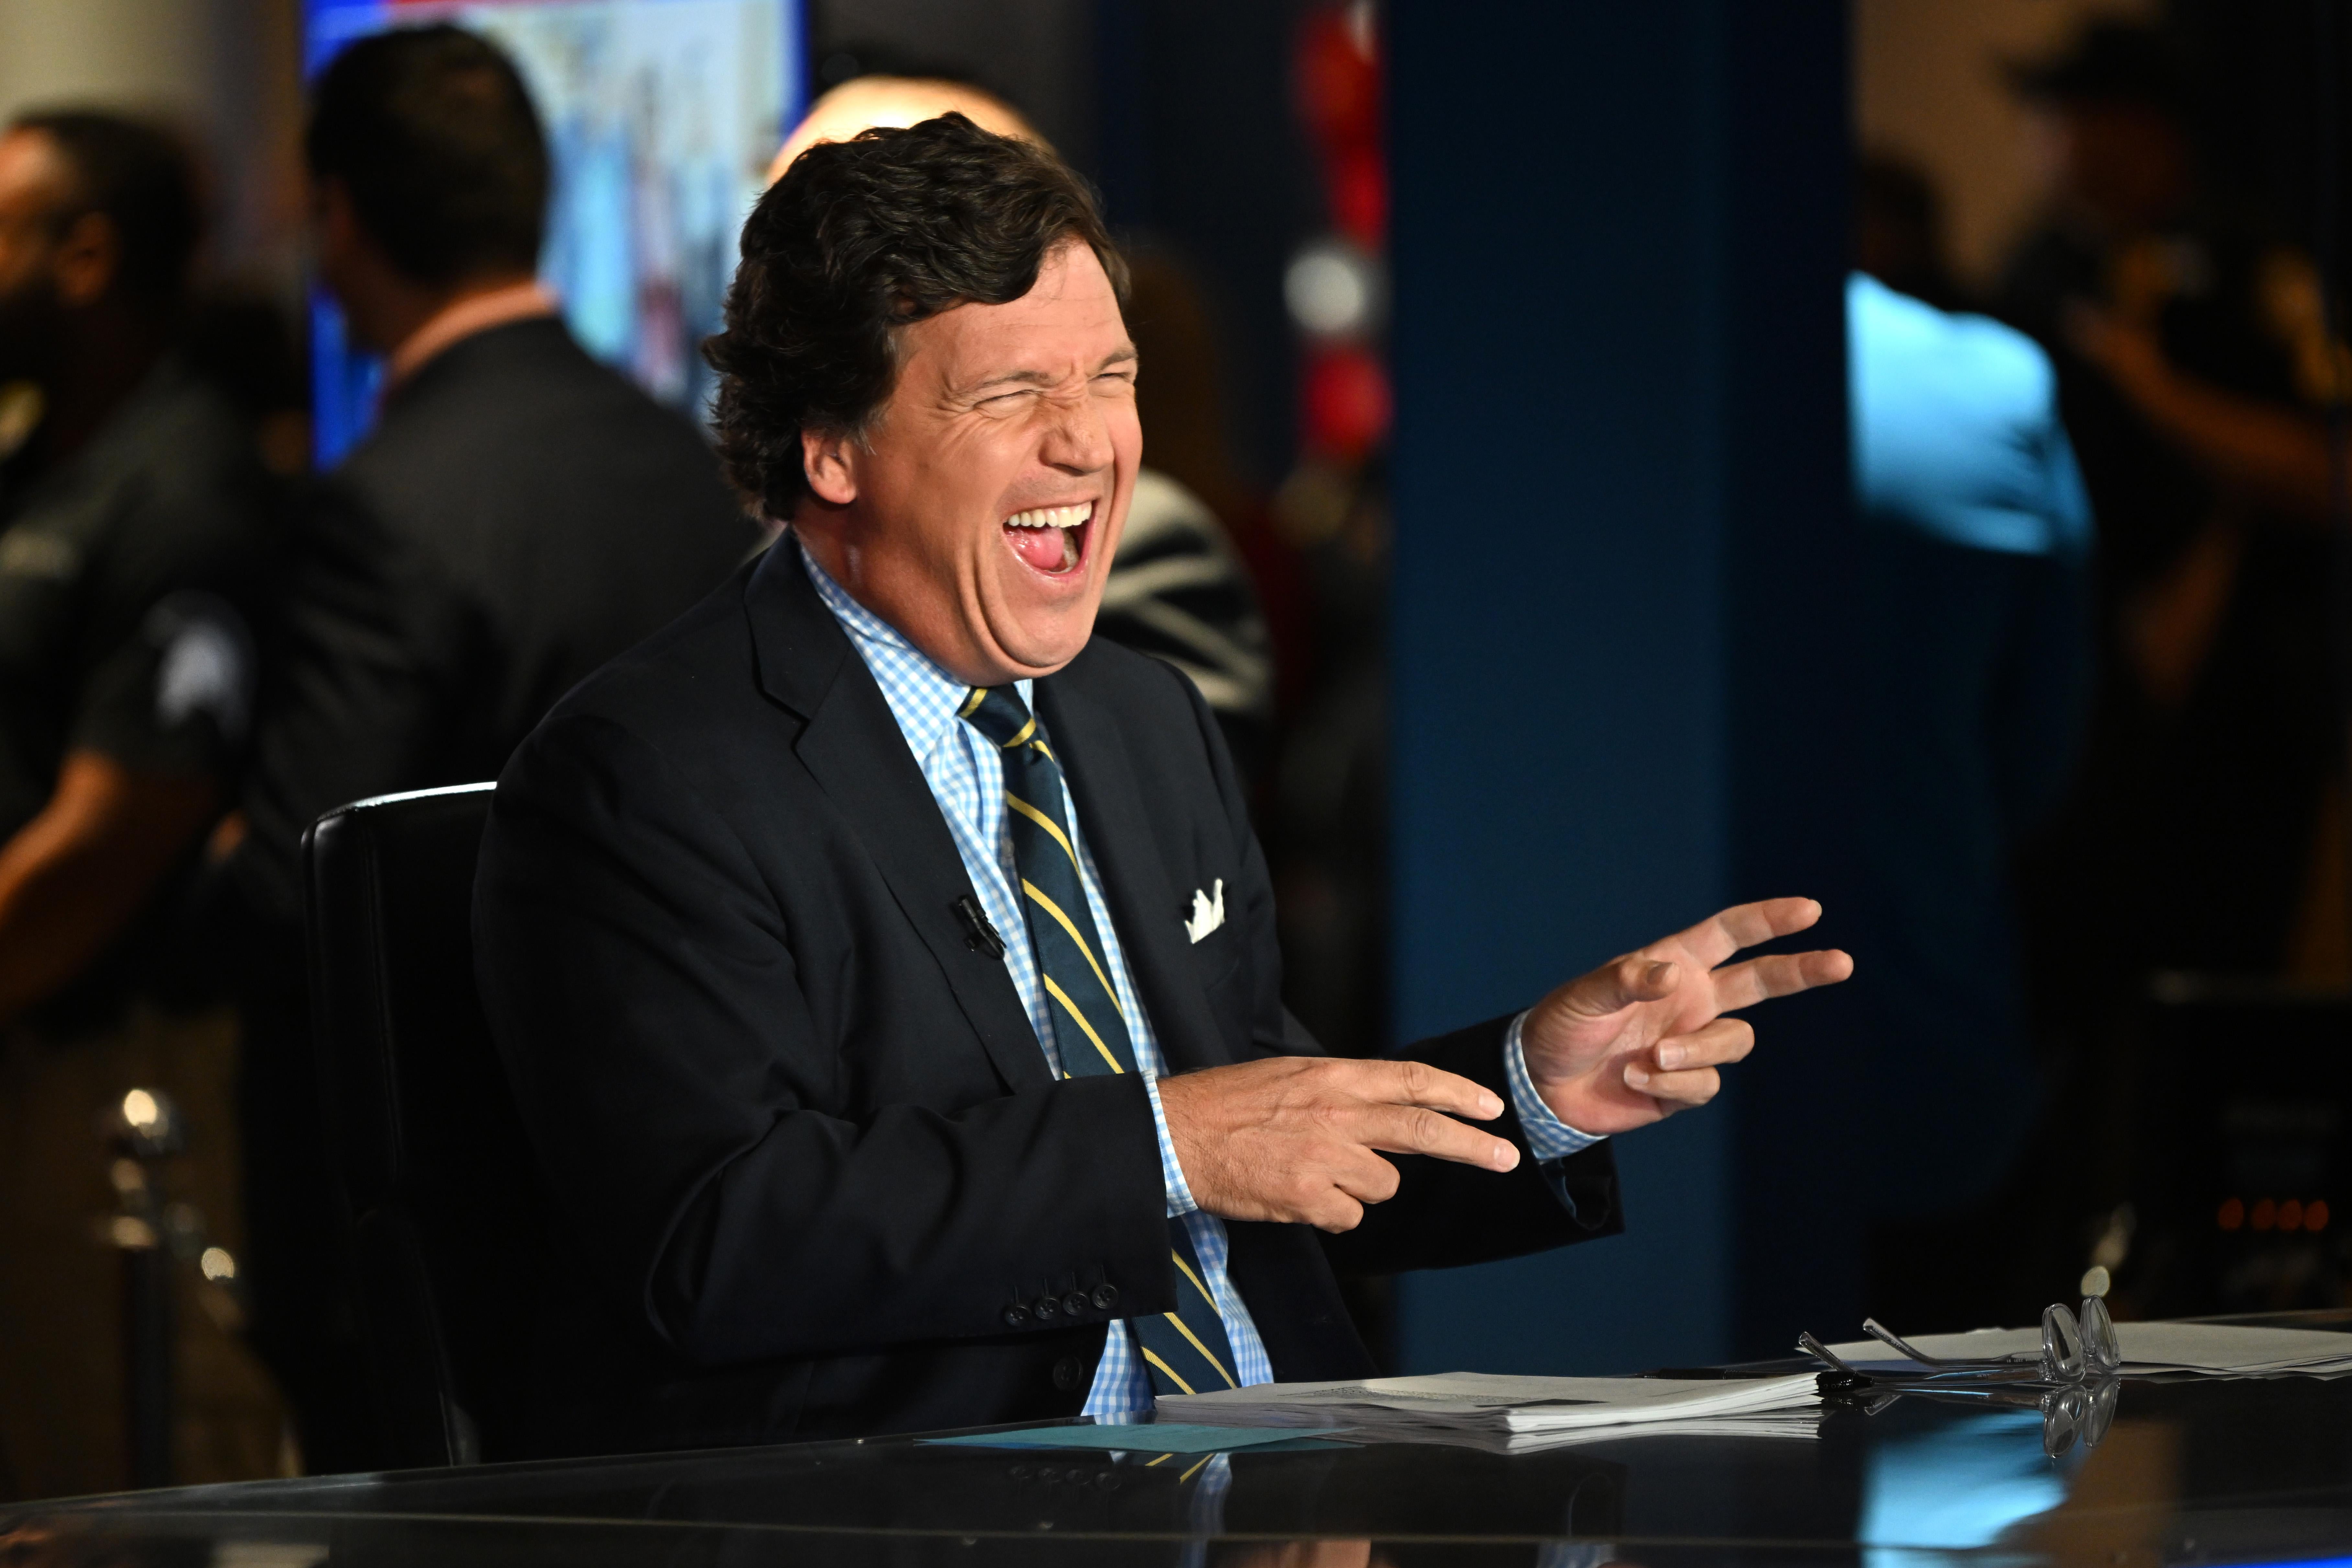 Tucker Carlson laughing apparently uproariously. 